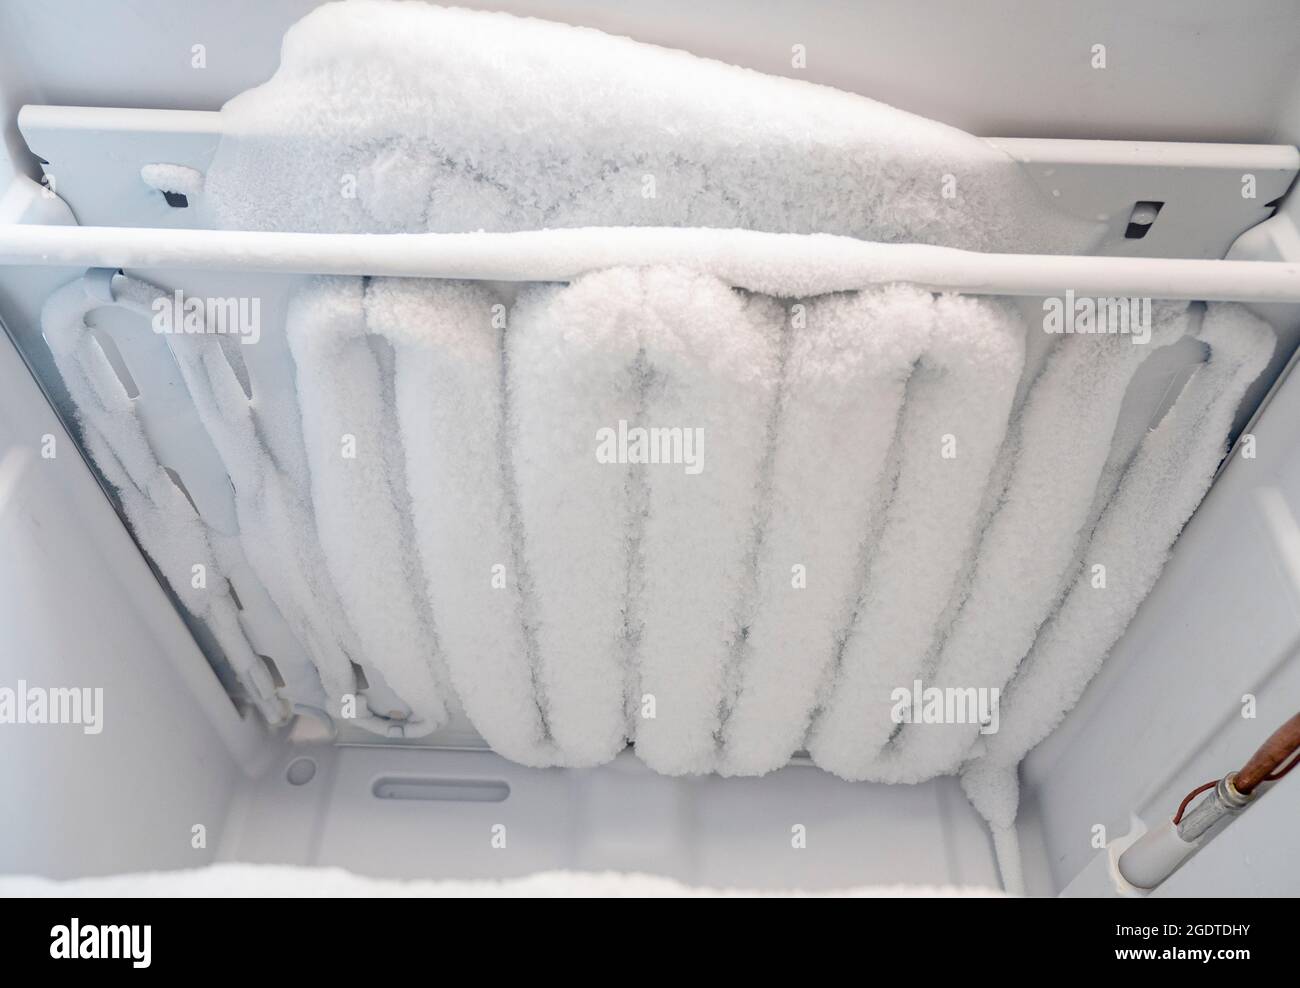 Close-up of opened deep freezer with ice and snow. Freezer before defrost. Empty shelves of fridge. Stock Photo